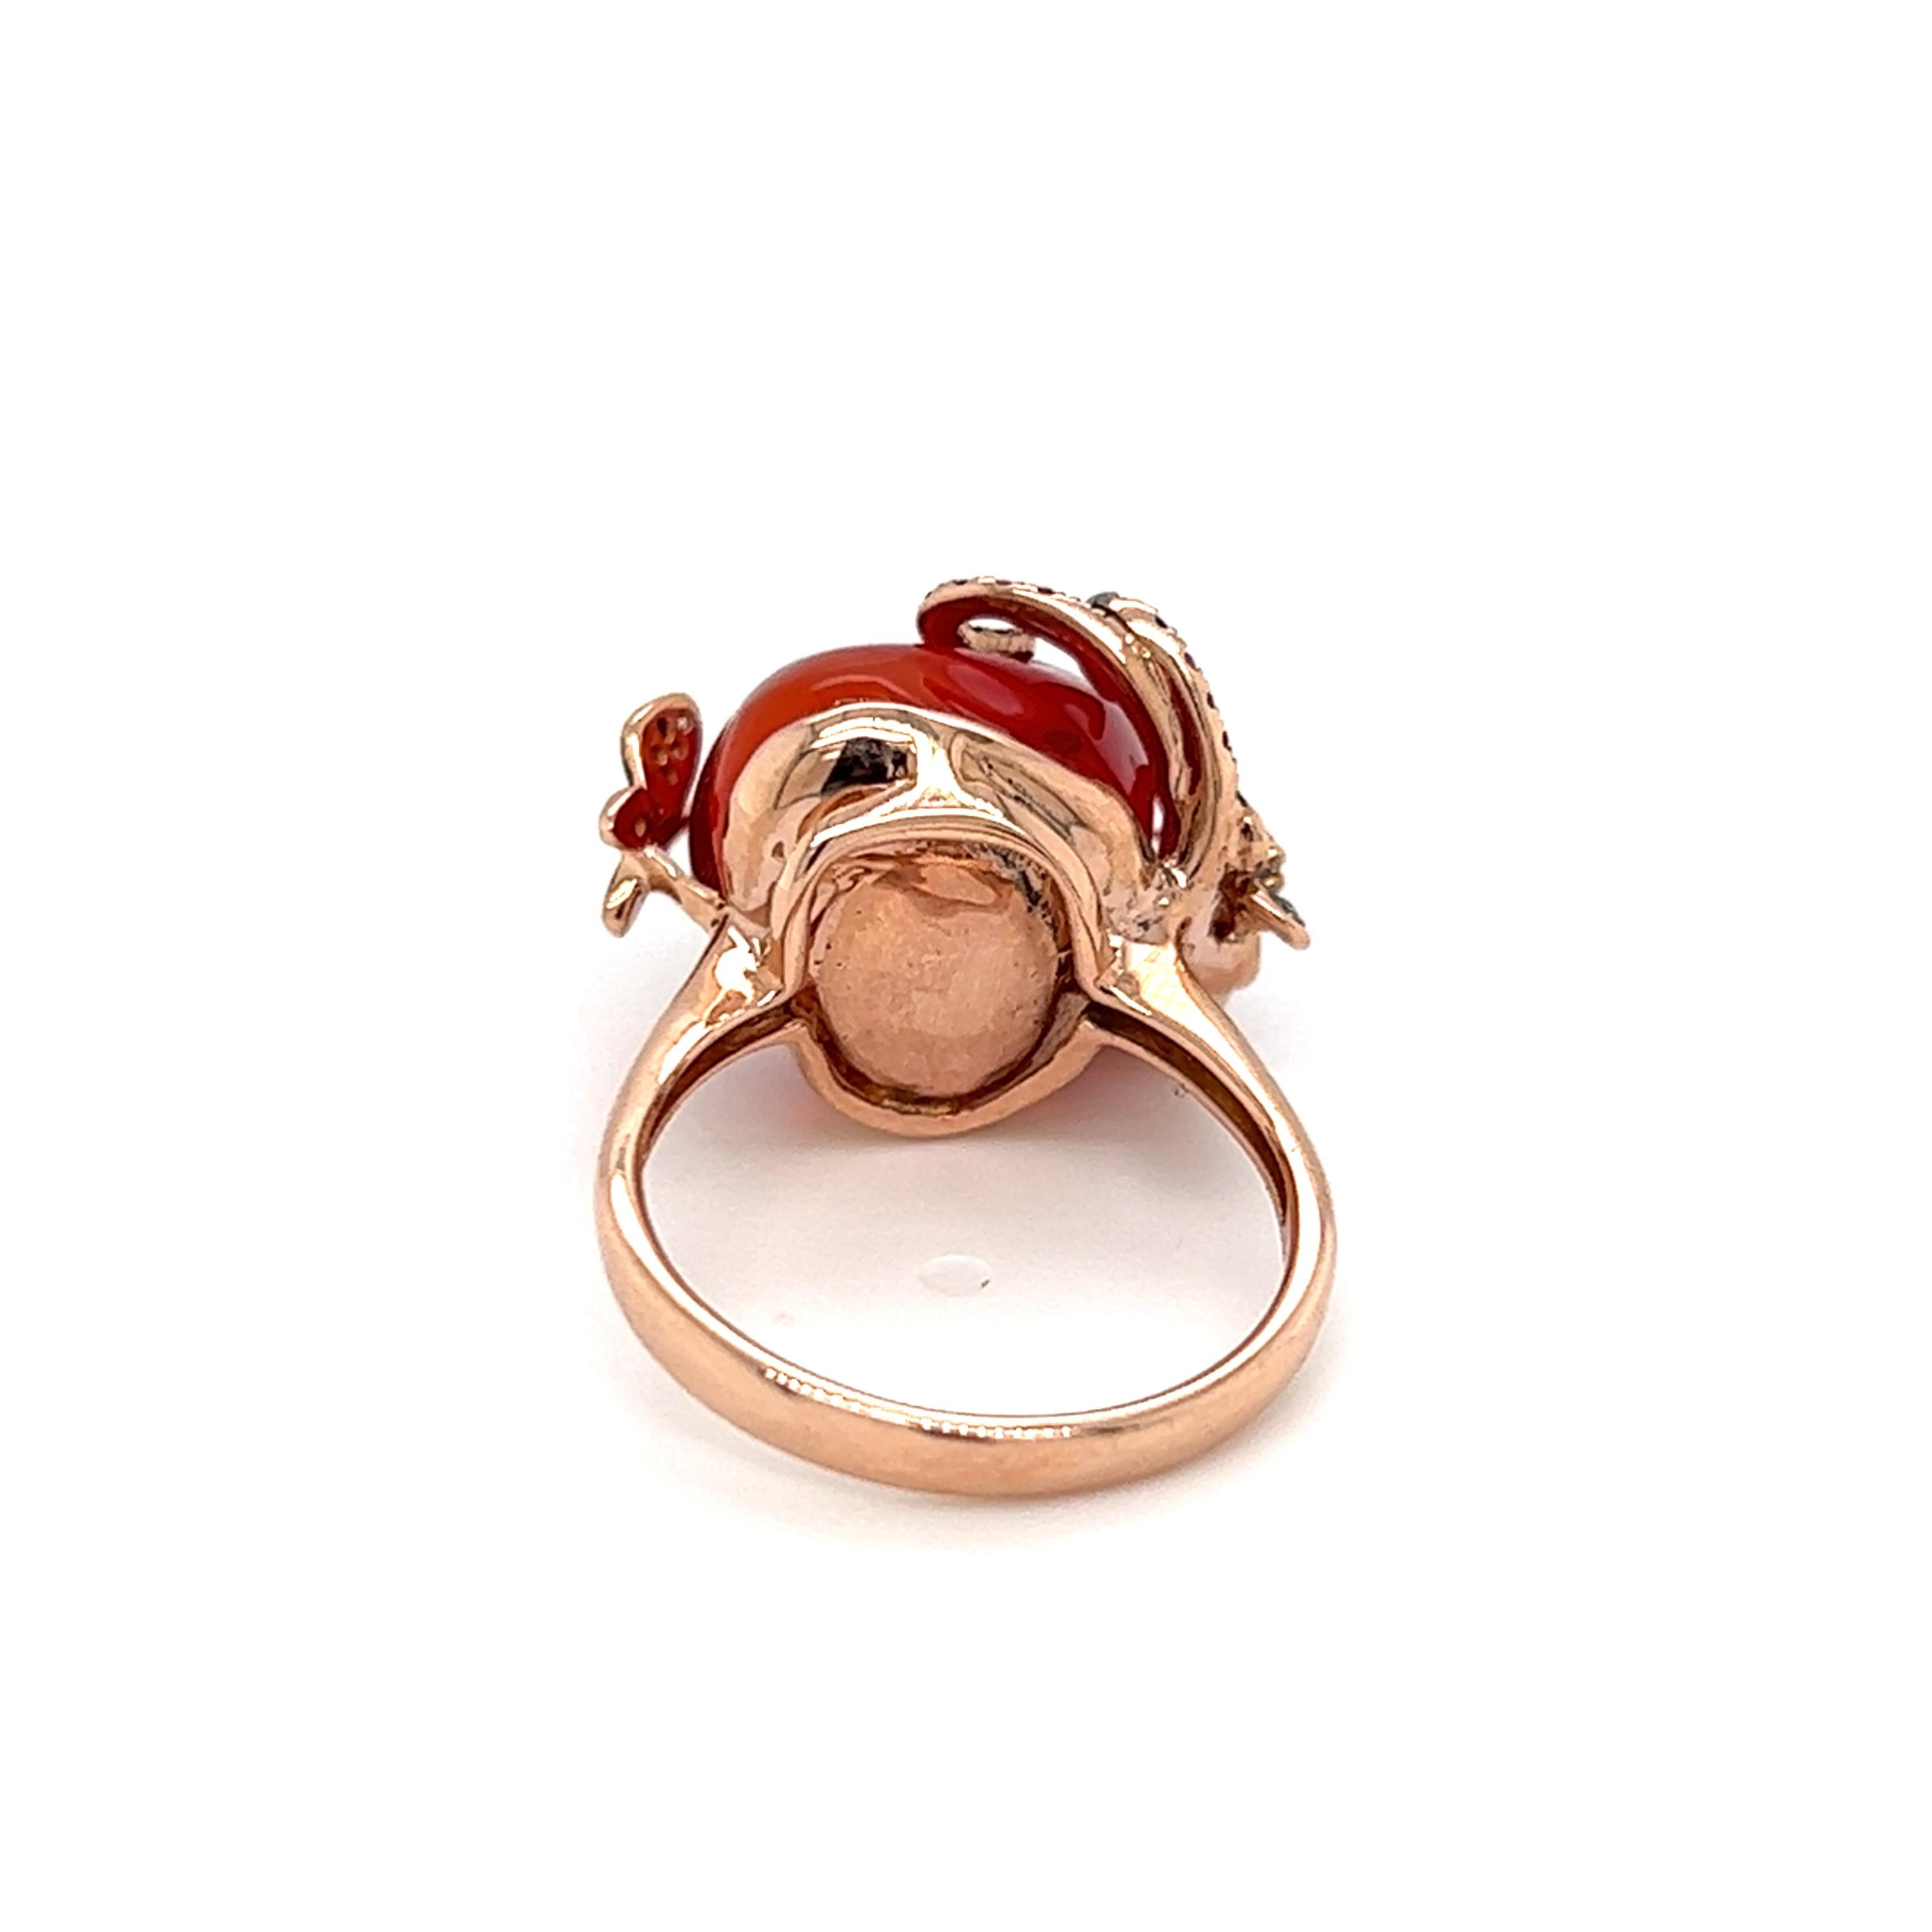 Contemporary 12.24 Carat Mexican Fire Opal with Diamonds and Rubies in 14K Rose Gold